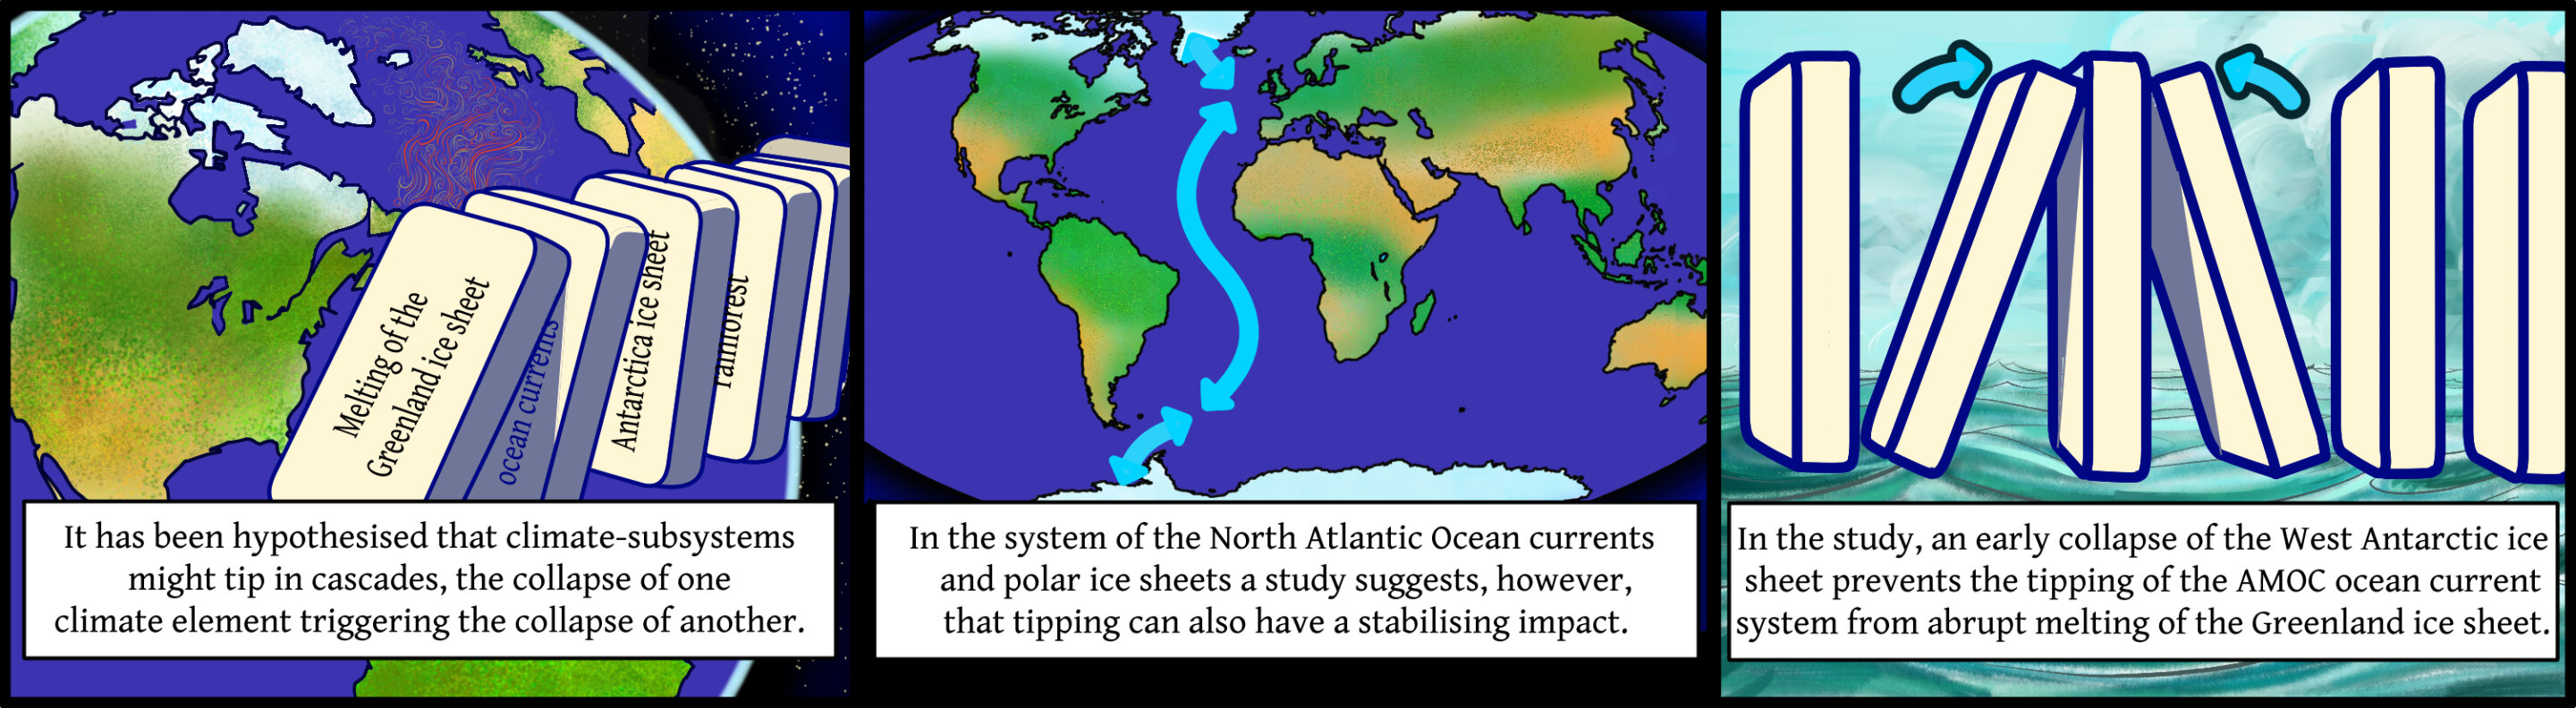 Climate tipping: West Antarctica ice sheet collapse may stabilize North Atlantic currents